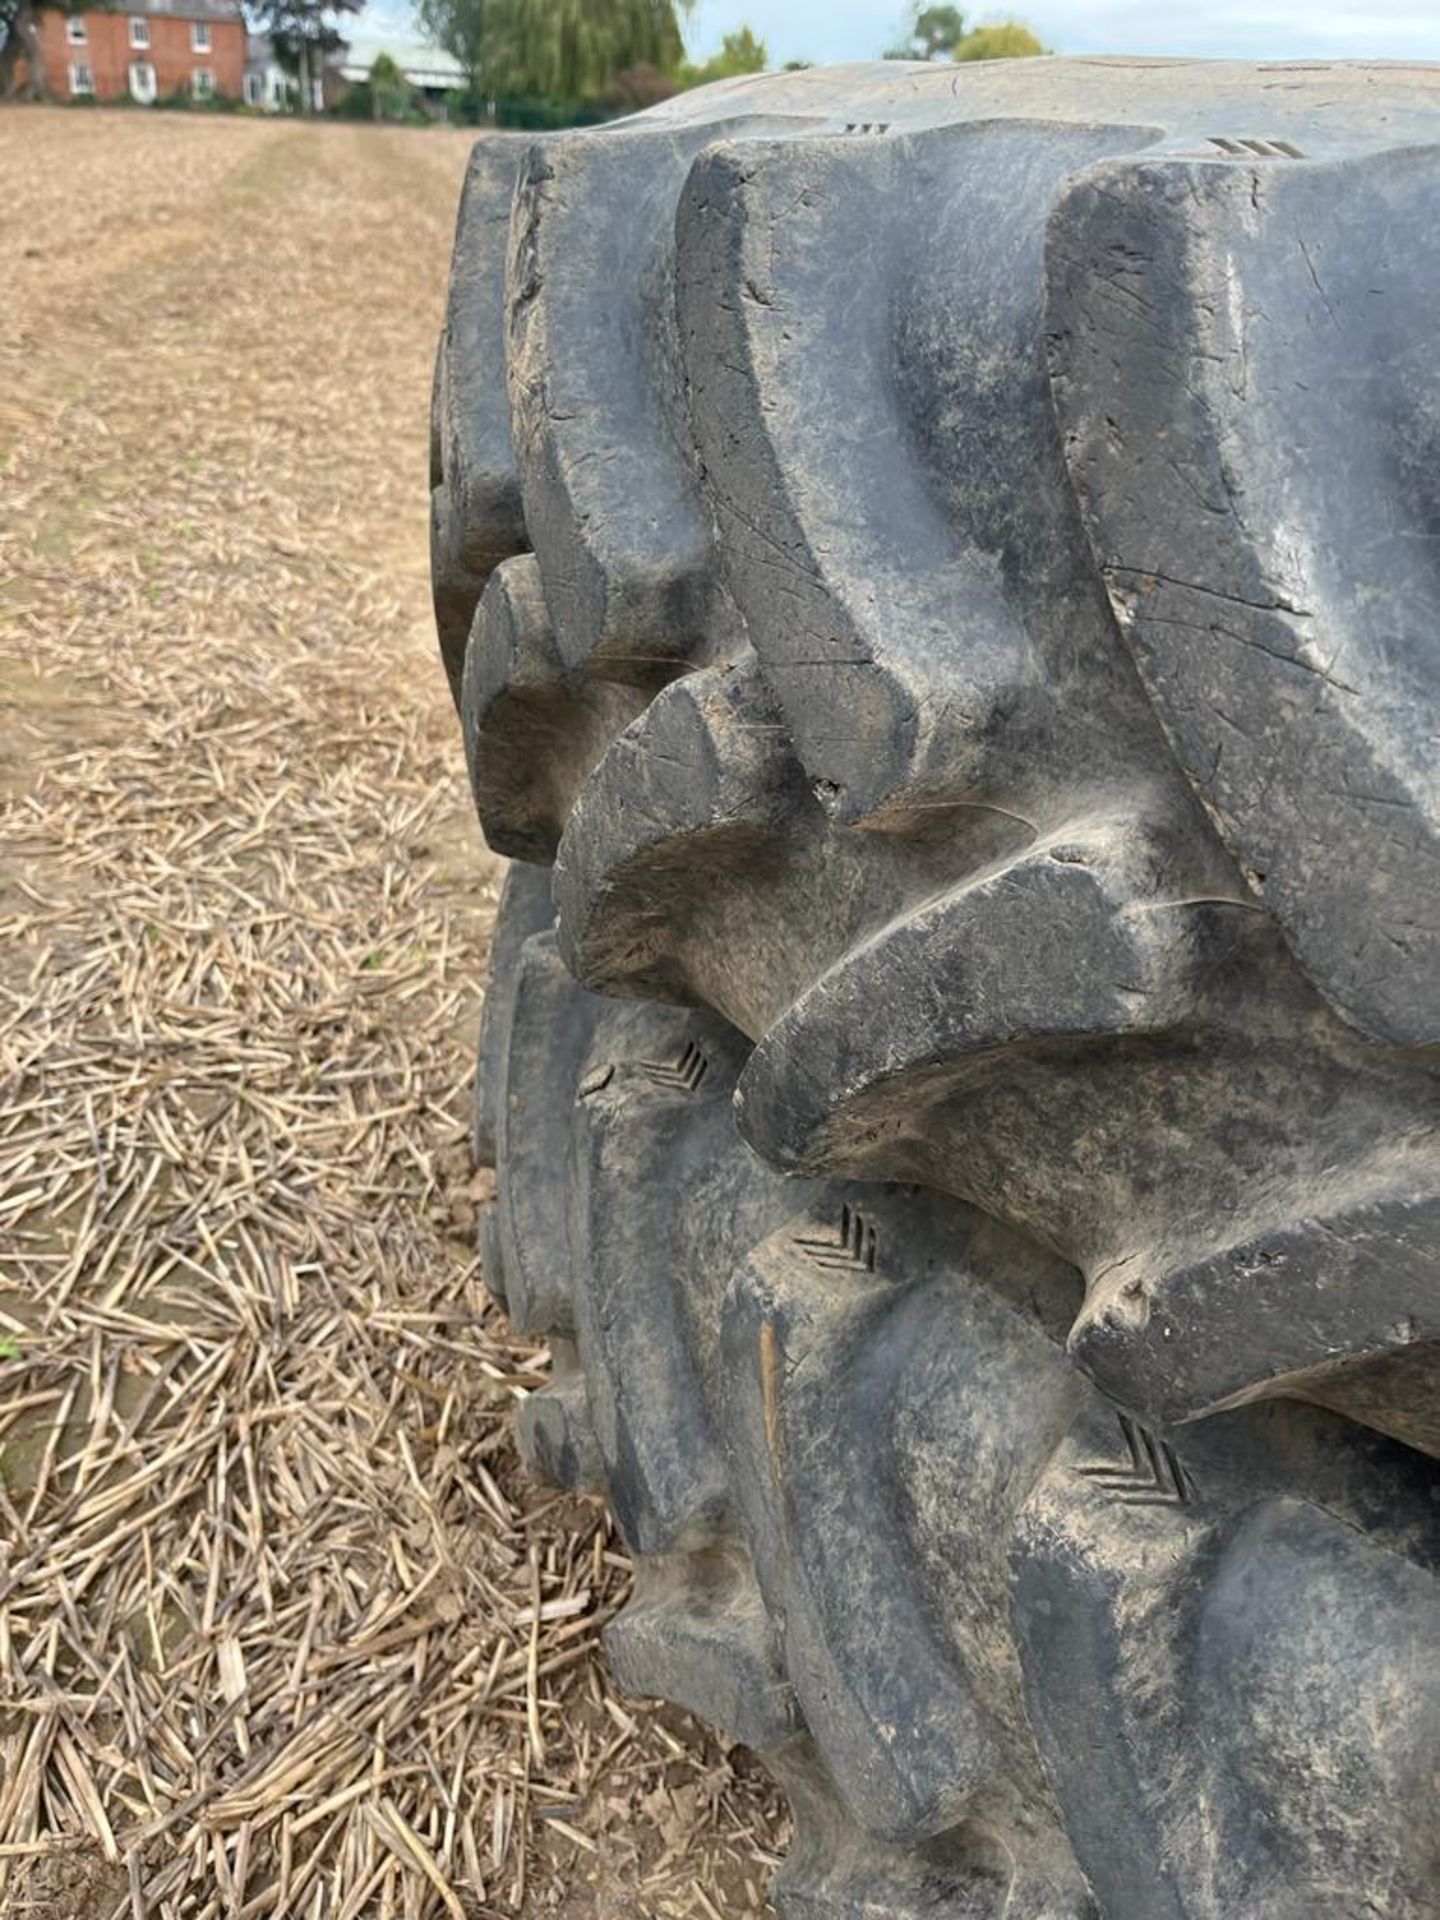 Kubota Row Crop Wheels and Tyres, Rear: 380/90 R46, Front 380/70 R28 - Image 5 of 9